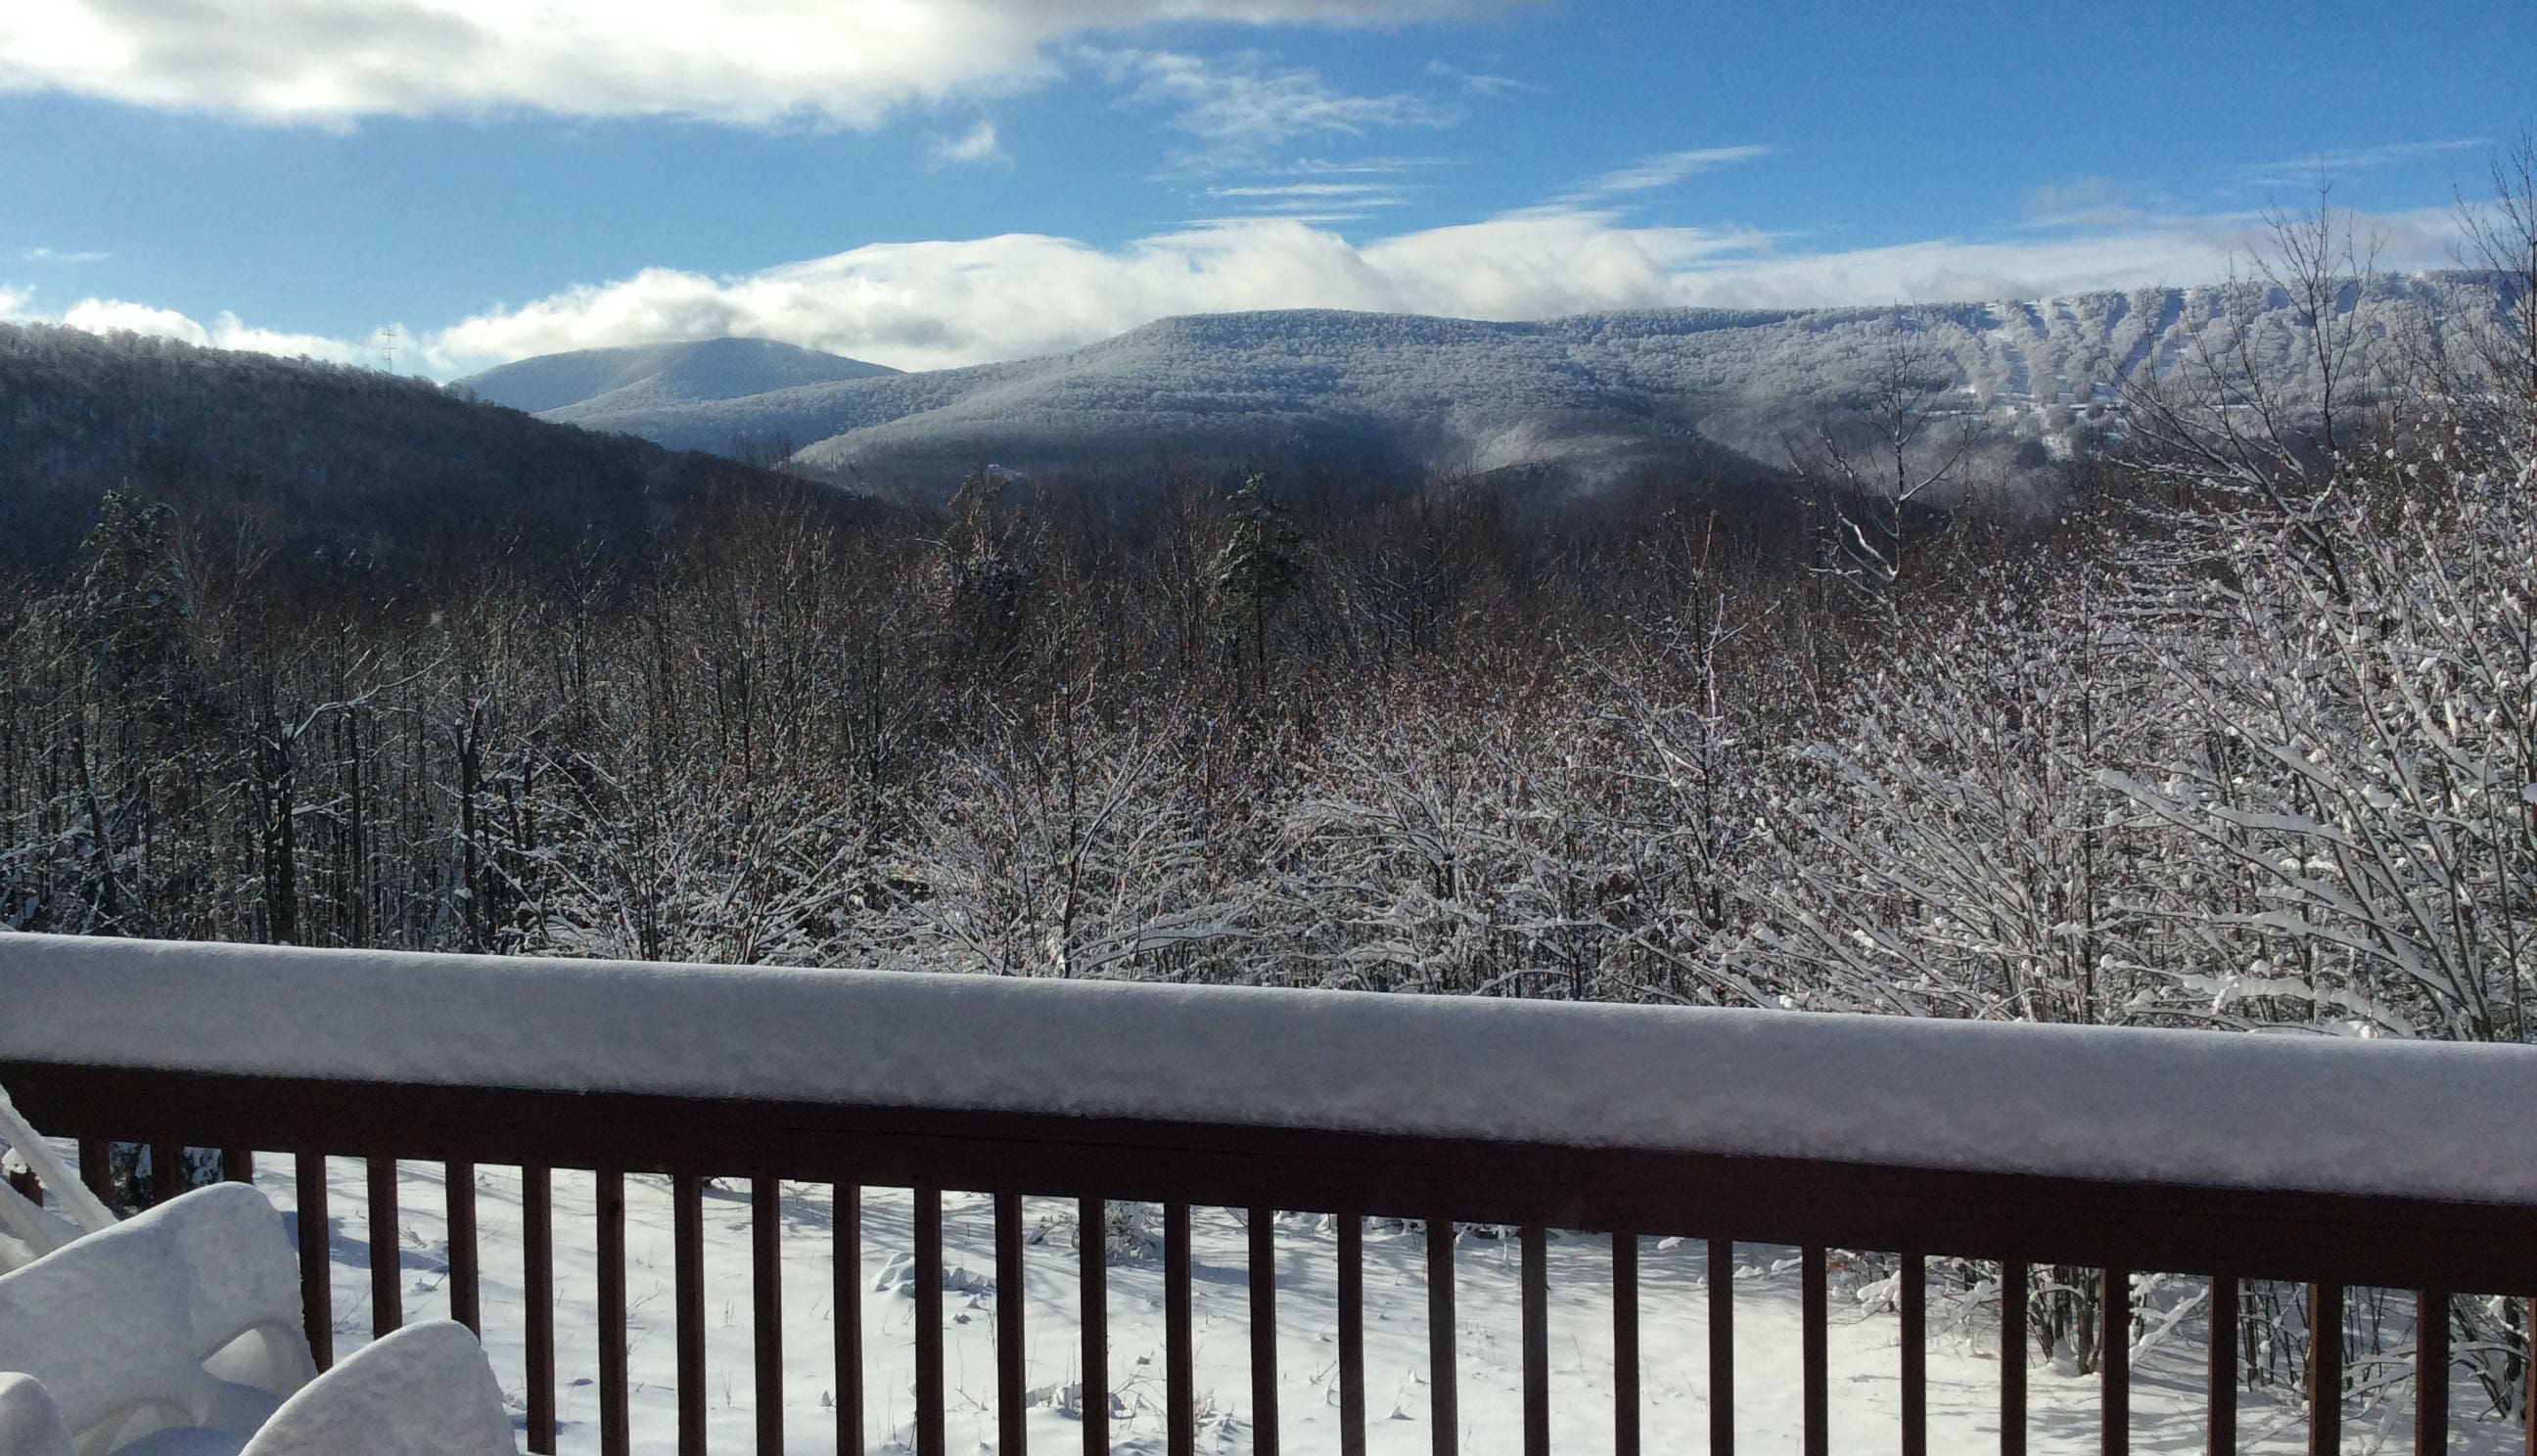 The deck and the mountains in the snow!